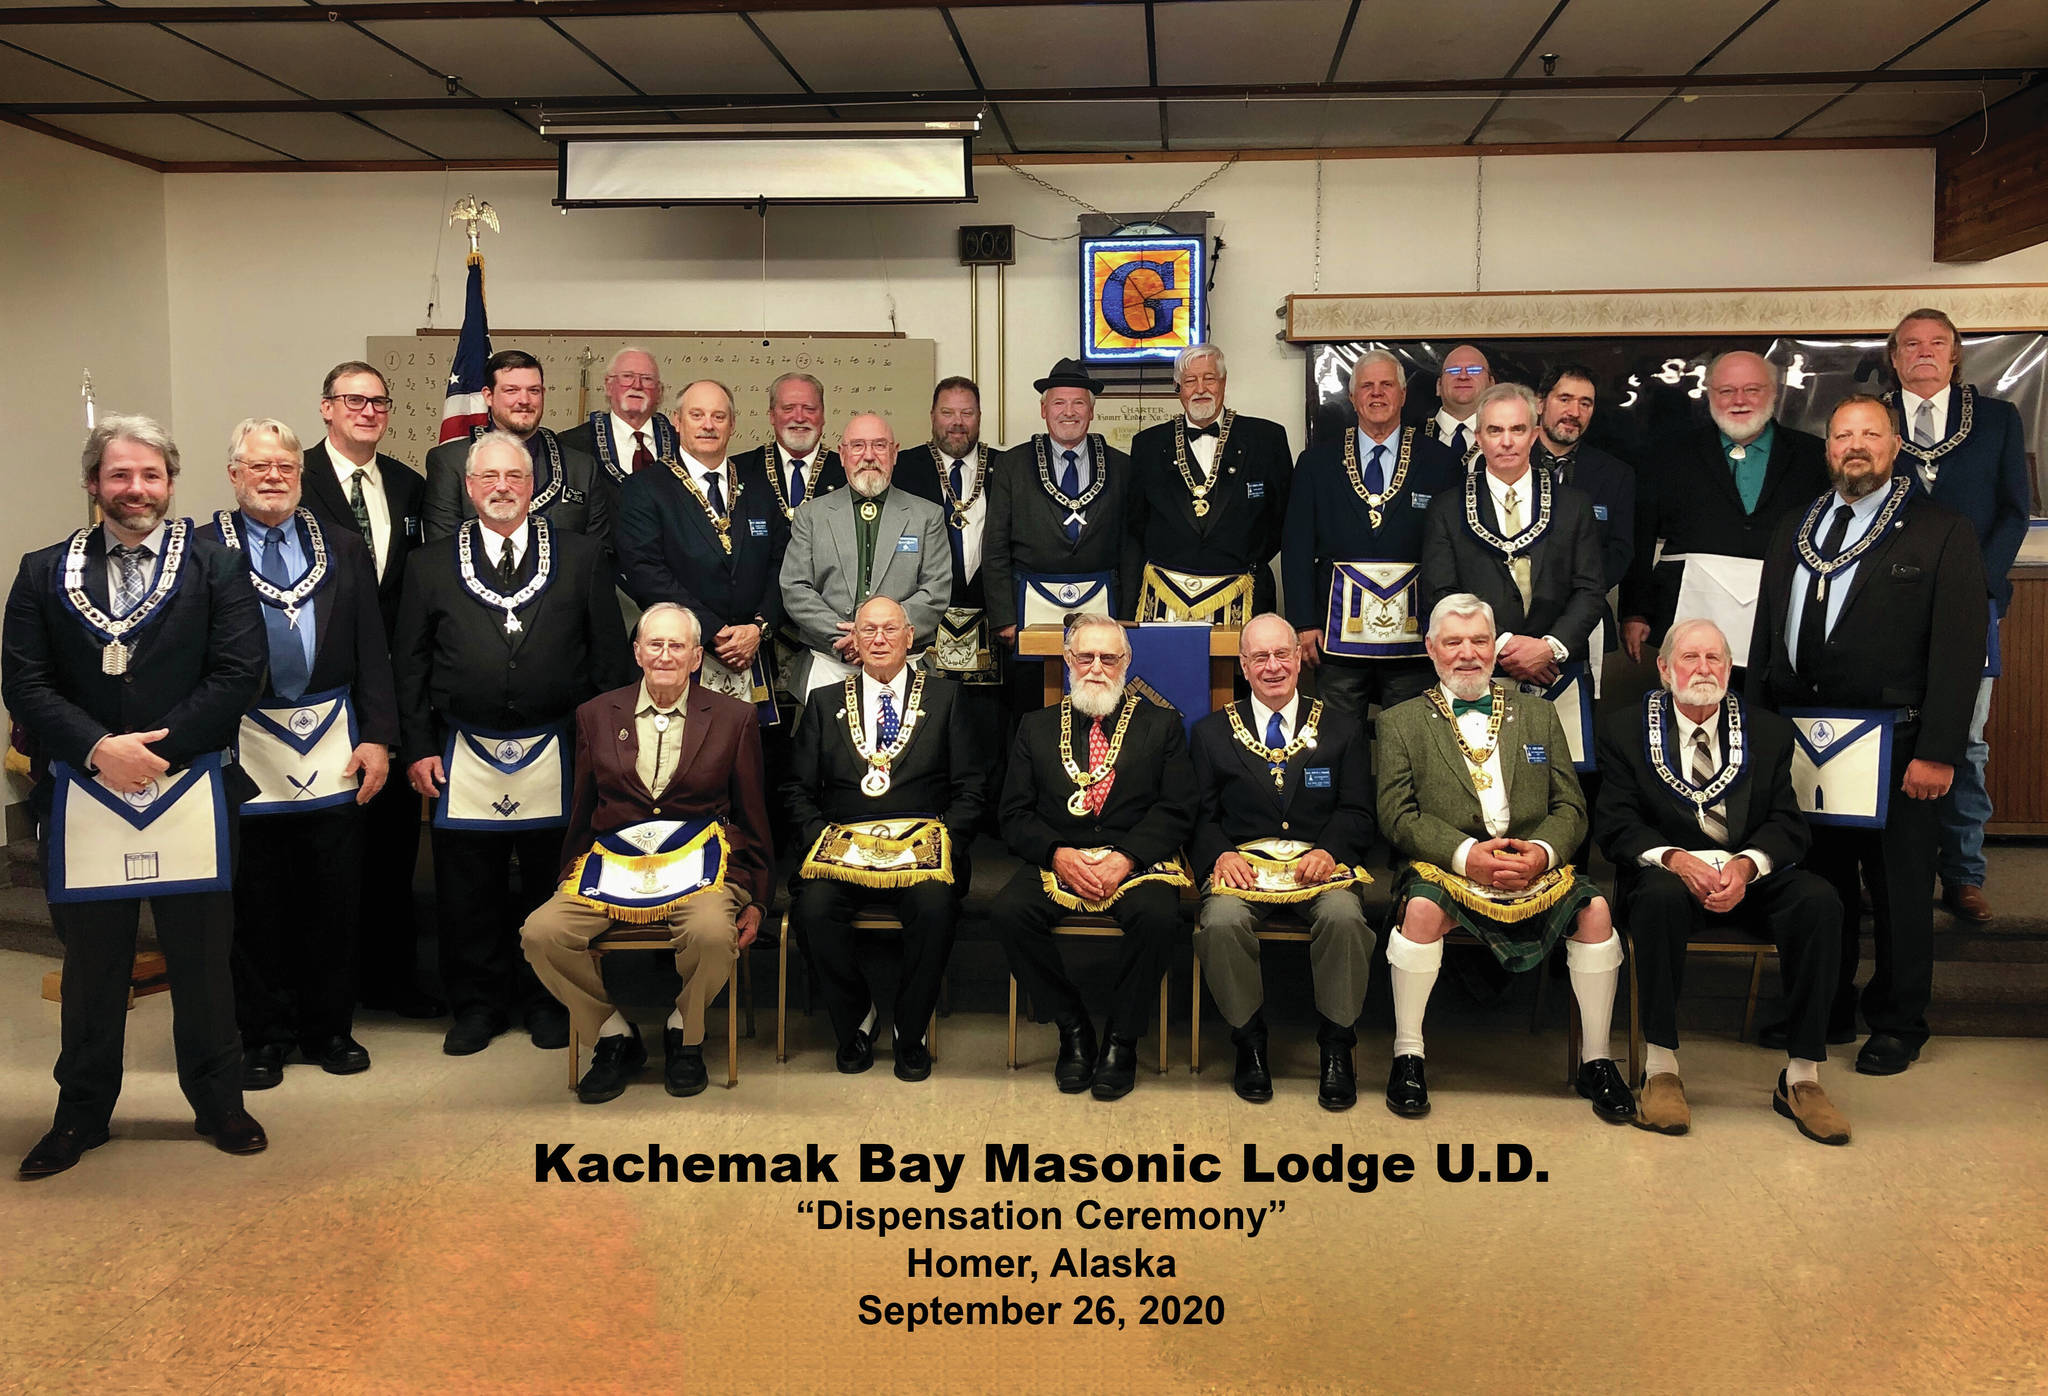 Members of the Kachemak Bay Masonic Lodge U.D. (Under Dispensation) and other Alaska Masons pose for a photo at a dispensation ceremony on Sept. 26, 2020, at the Homer Elks Lodge in Homer, Alaska. (Photo courtesy of Kachemak Bay Masonic Lodge U.D.)